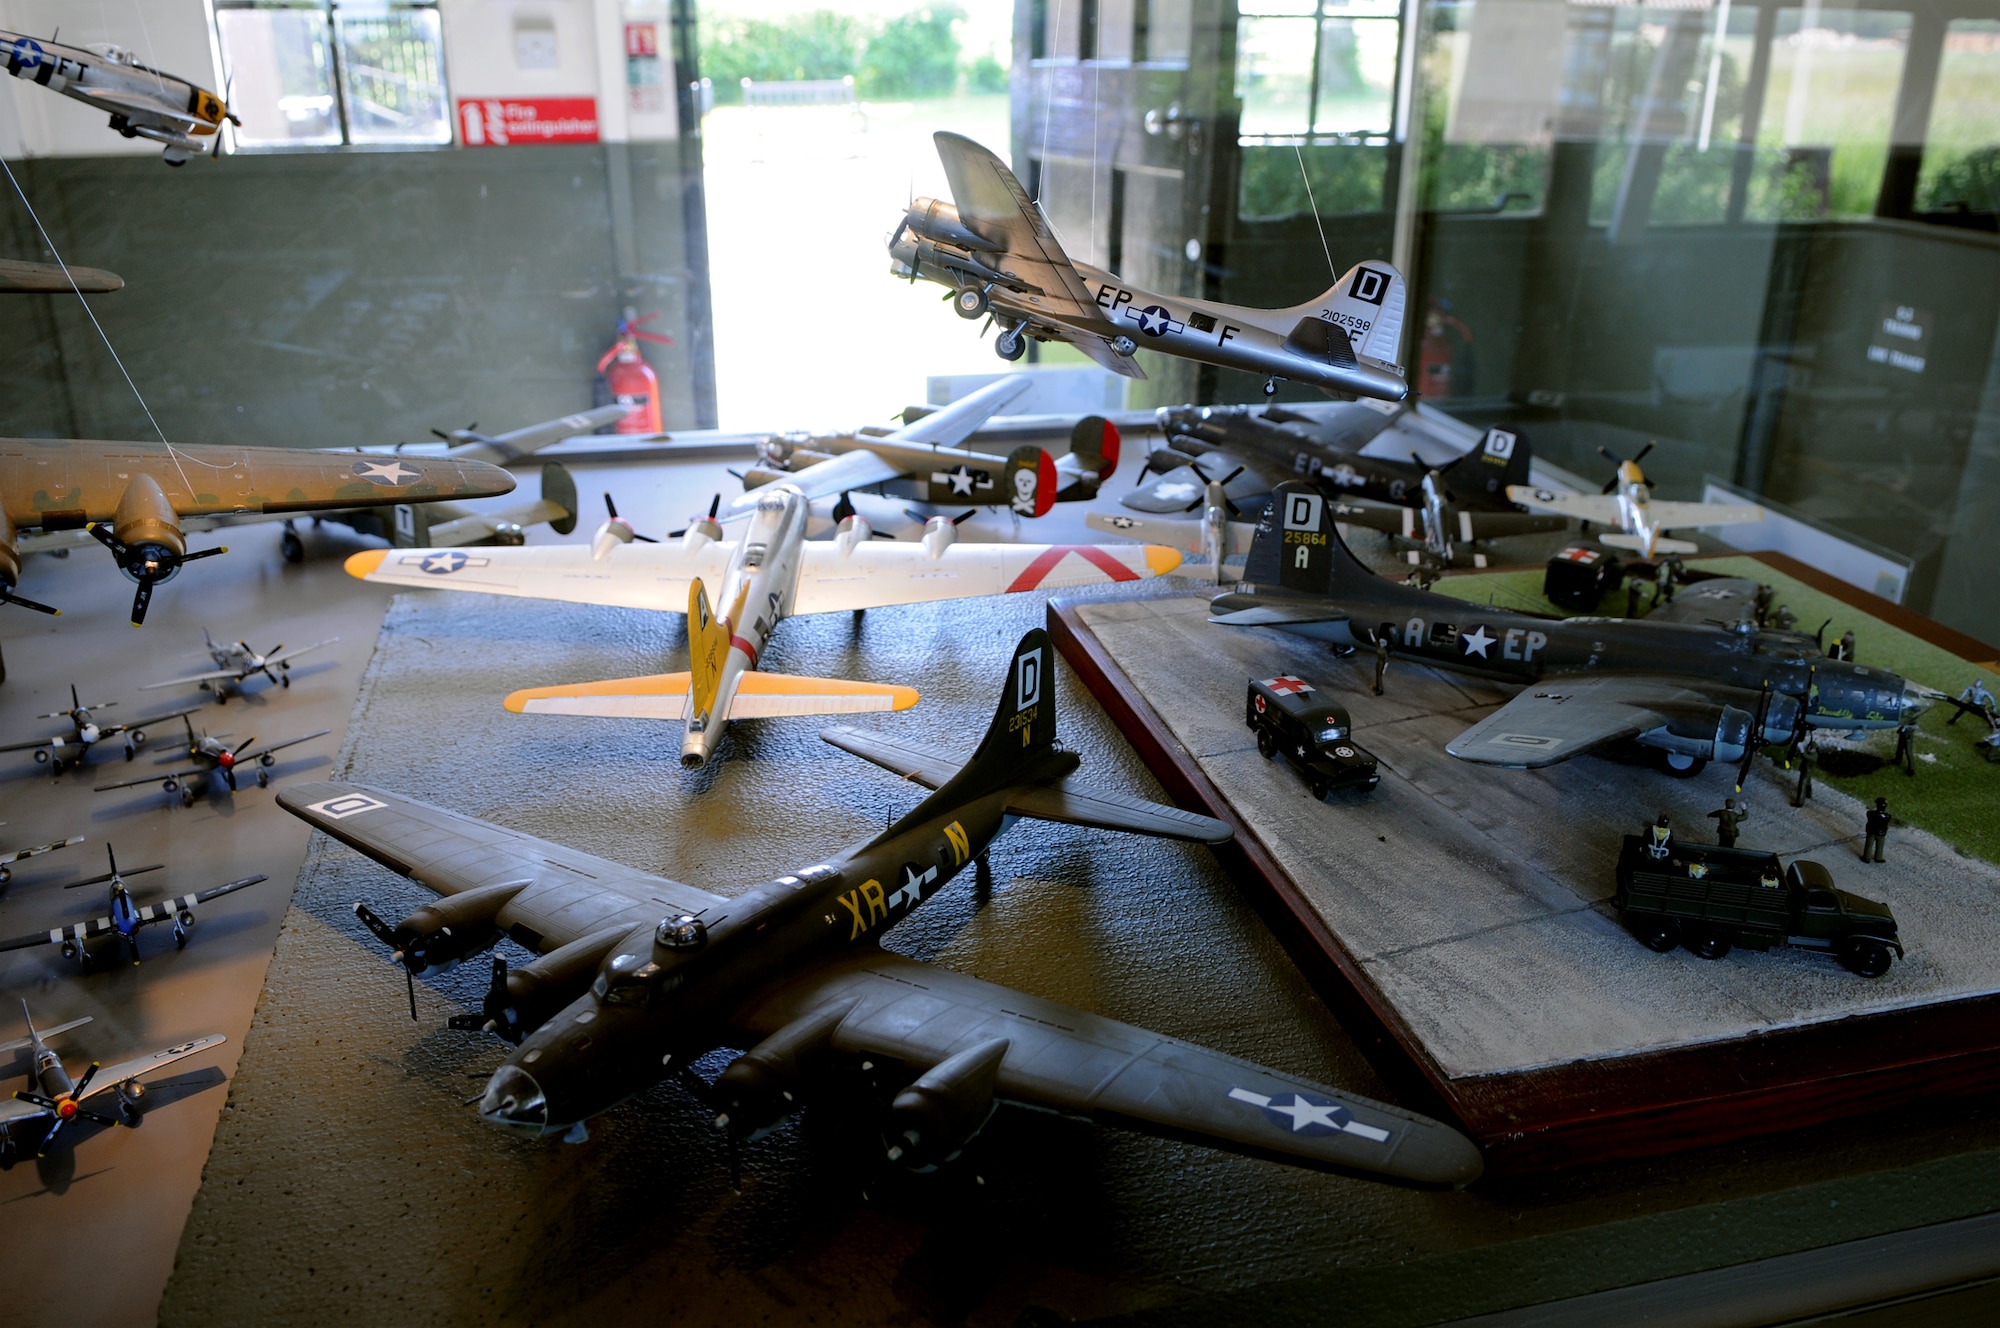 A display of model aircraft, many of which display the same “Box D” insignia on the tail of RAF Mildenhall’s KC-135 fleet, sits in one of several buildings at Thorpe Abbots, the original home of the 100th Bomb Group in World War II.  The airfield and its buildings have been transformed into a museum dedicated to World War II aviation.  (U.S. Air Force photo by Staff Sgt. Austin M. May)